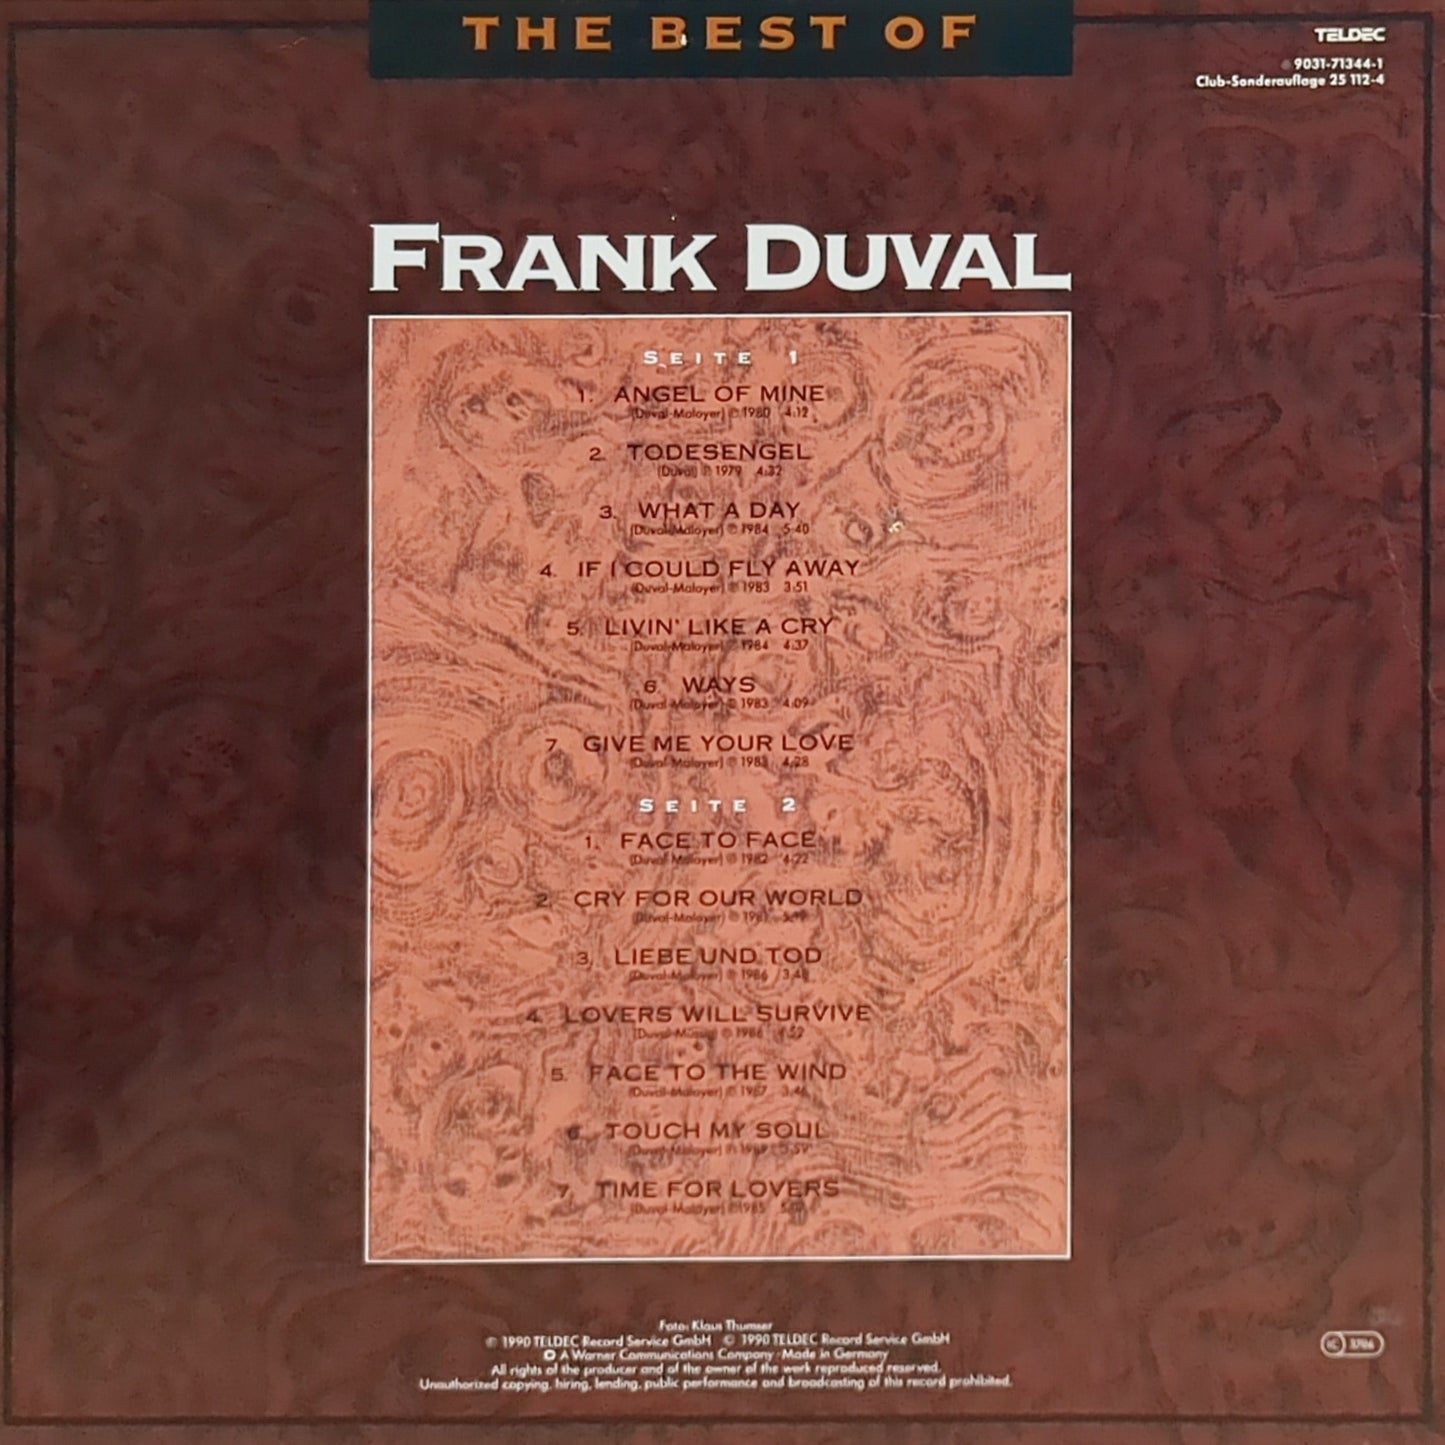 Frank Duval - The Best Of Frank Duval